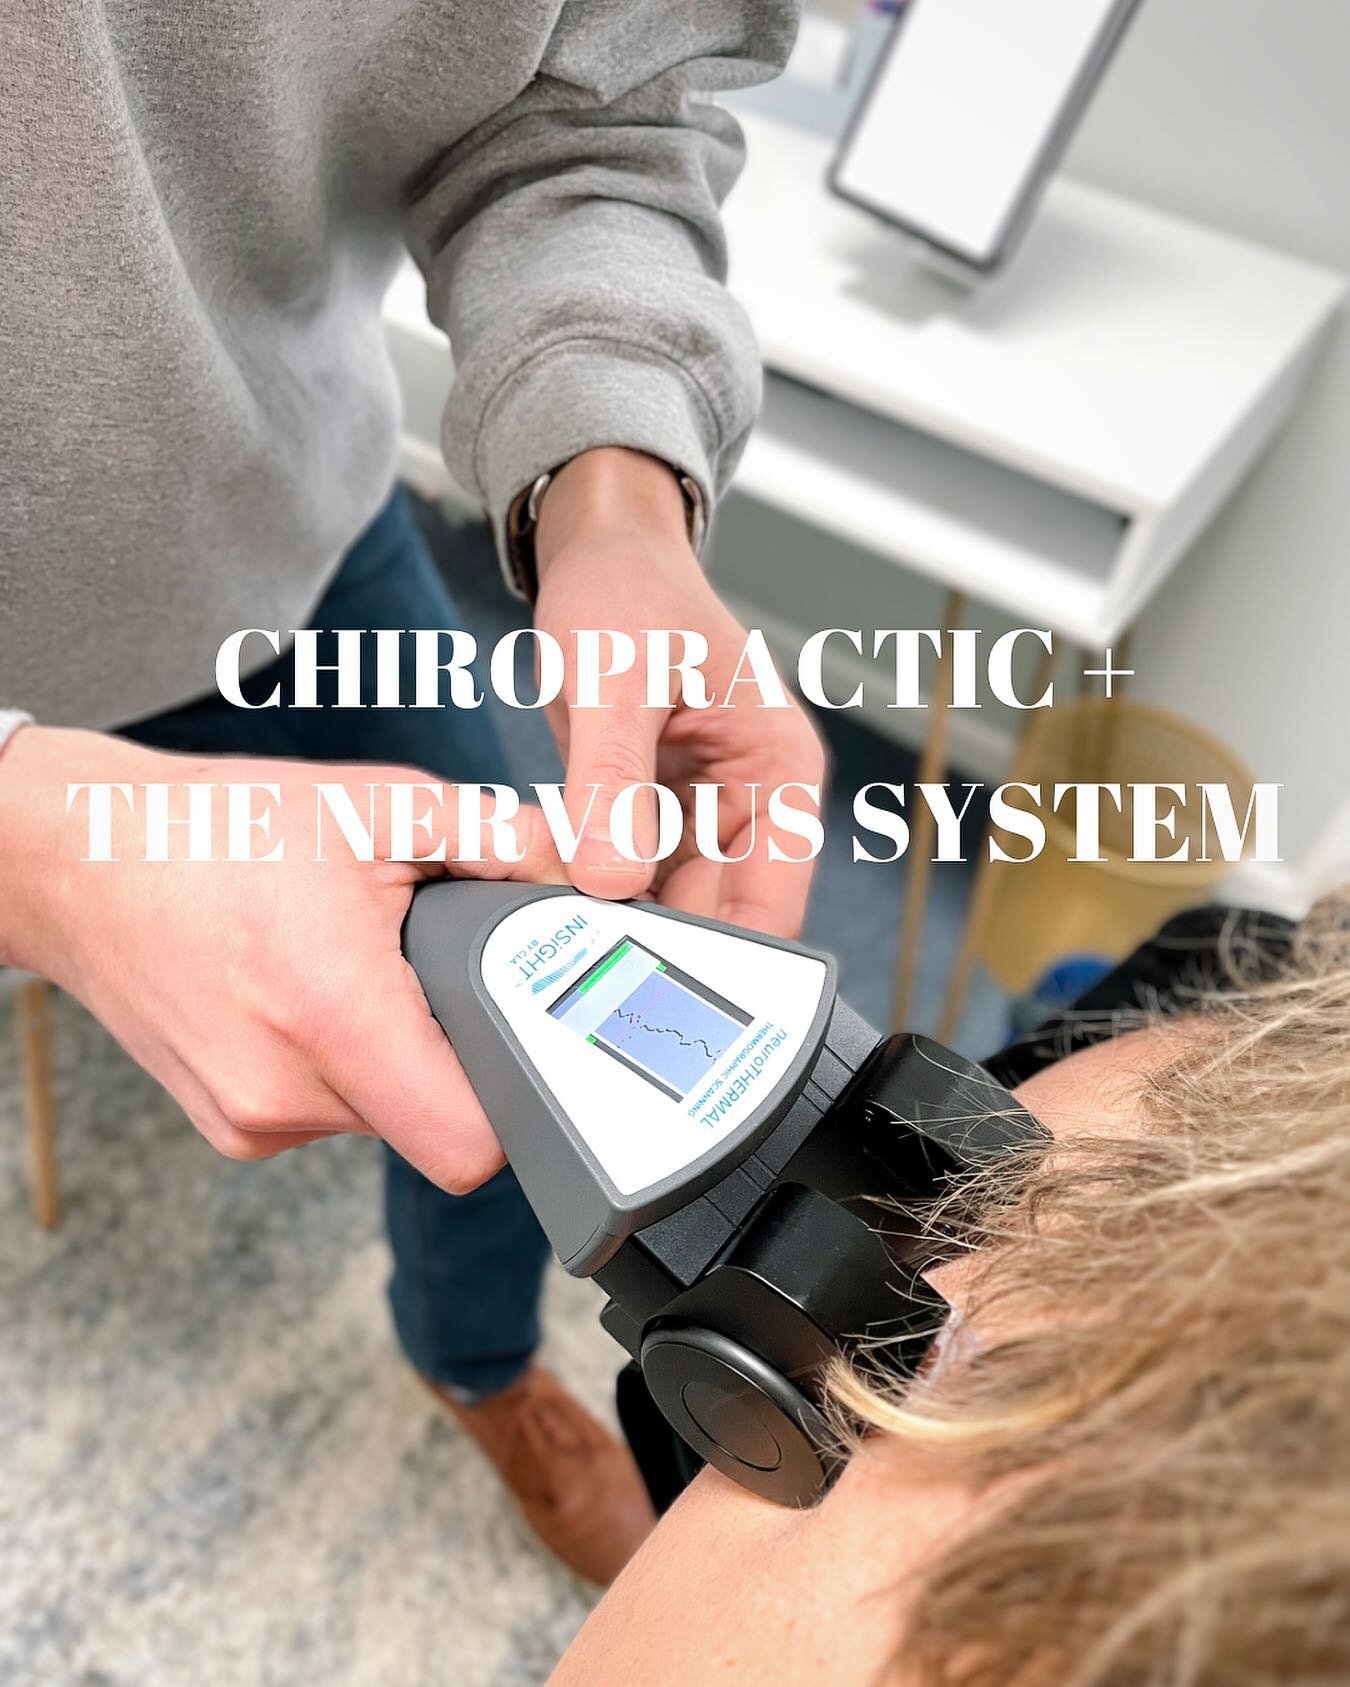 There&rsquo;s no guessing in our office as to how your body is functioning! From the in-depth intake and discussing your health history and concerns, to our nervous system scanning technology, we are able to get a look at how your body is functioning